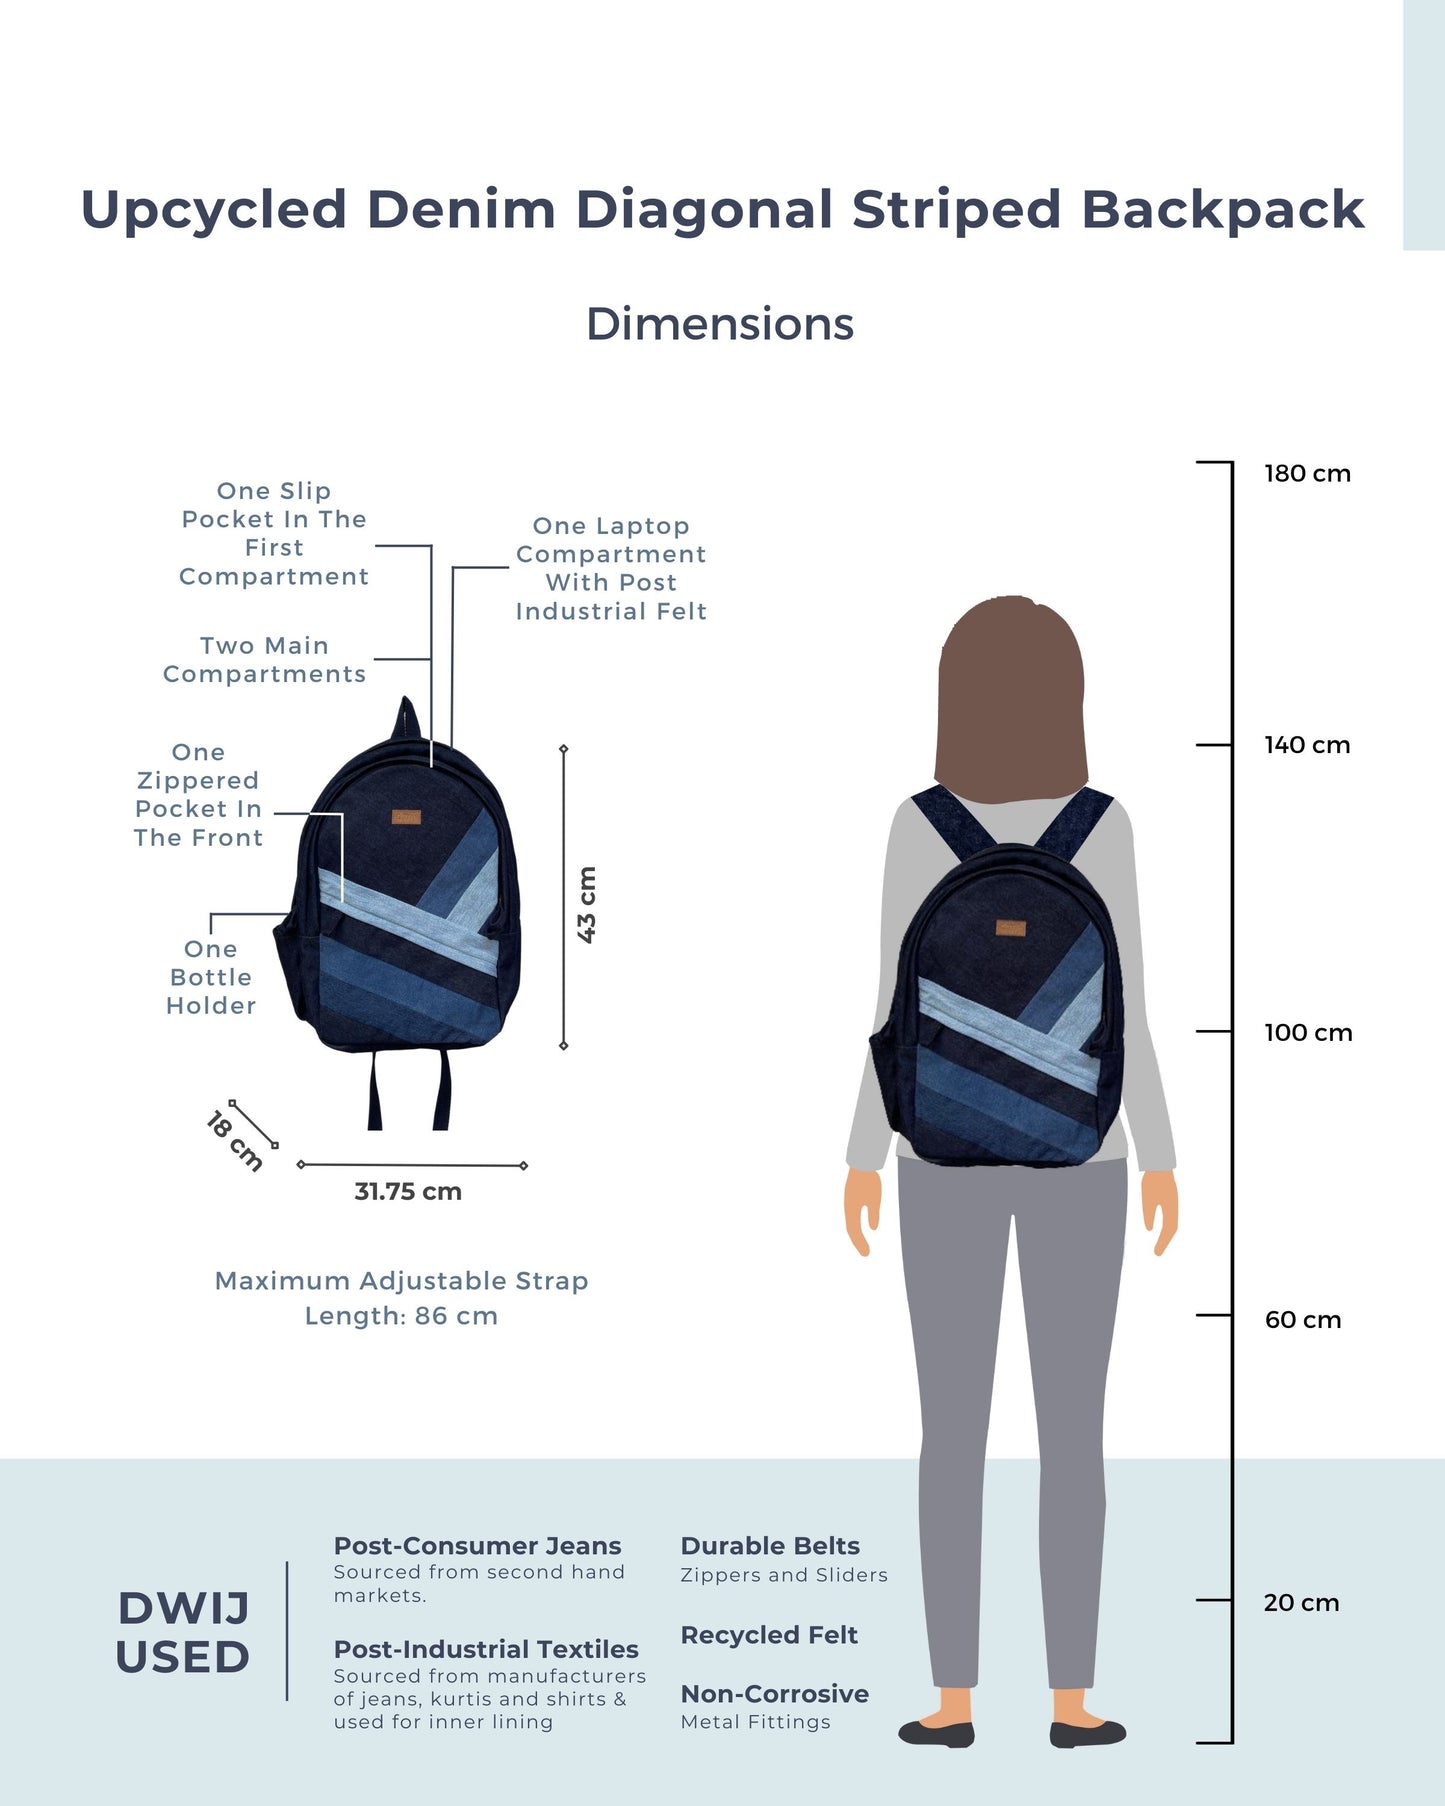 Upcycled Handcrafted Diagonal Striped Denim Travel Backpack